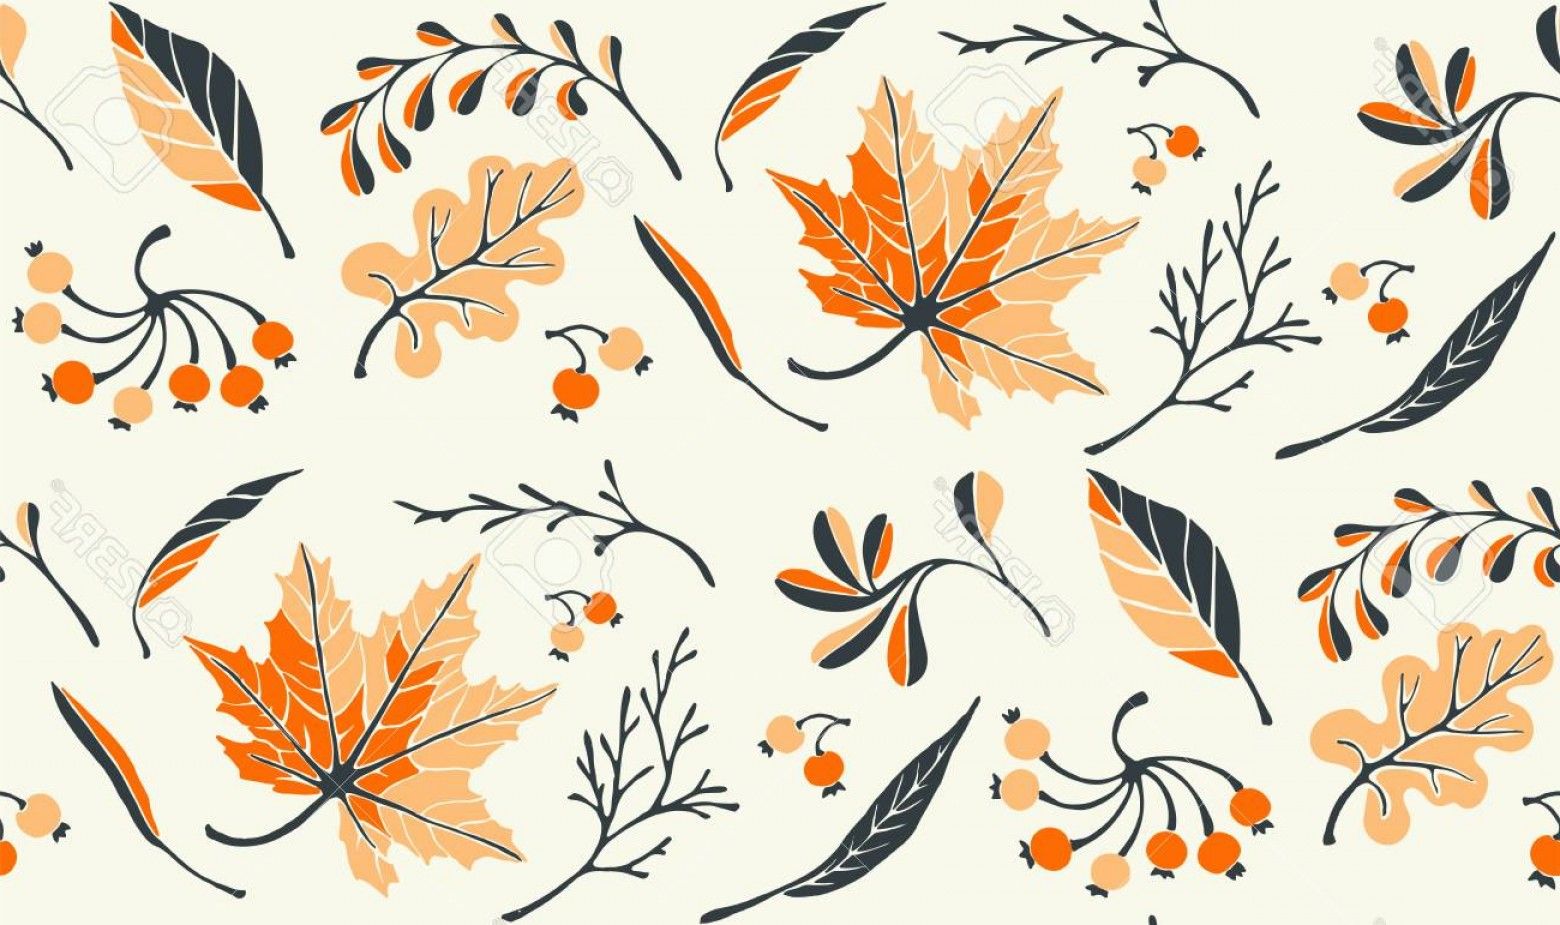 Adorable Cute fall desktop backgrounds for autumnal charm